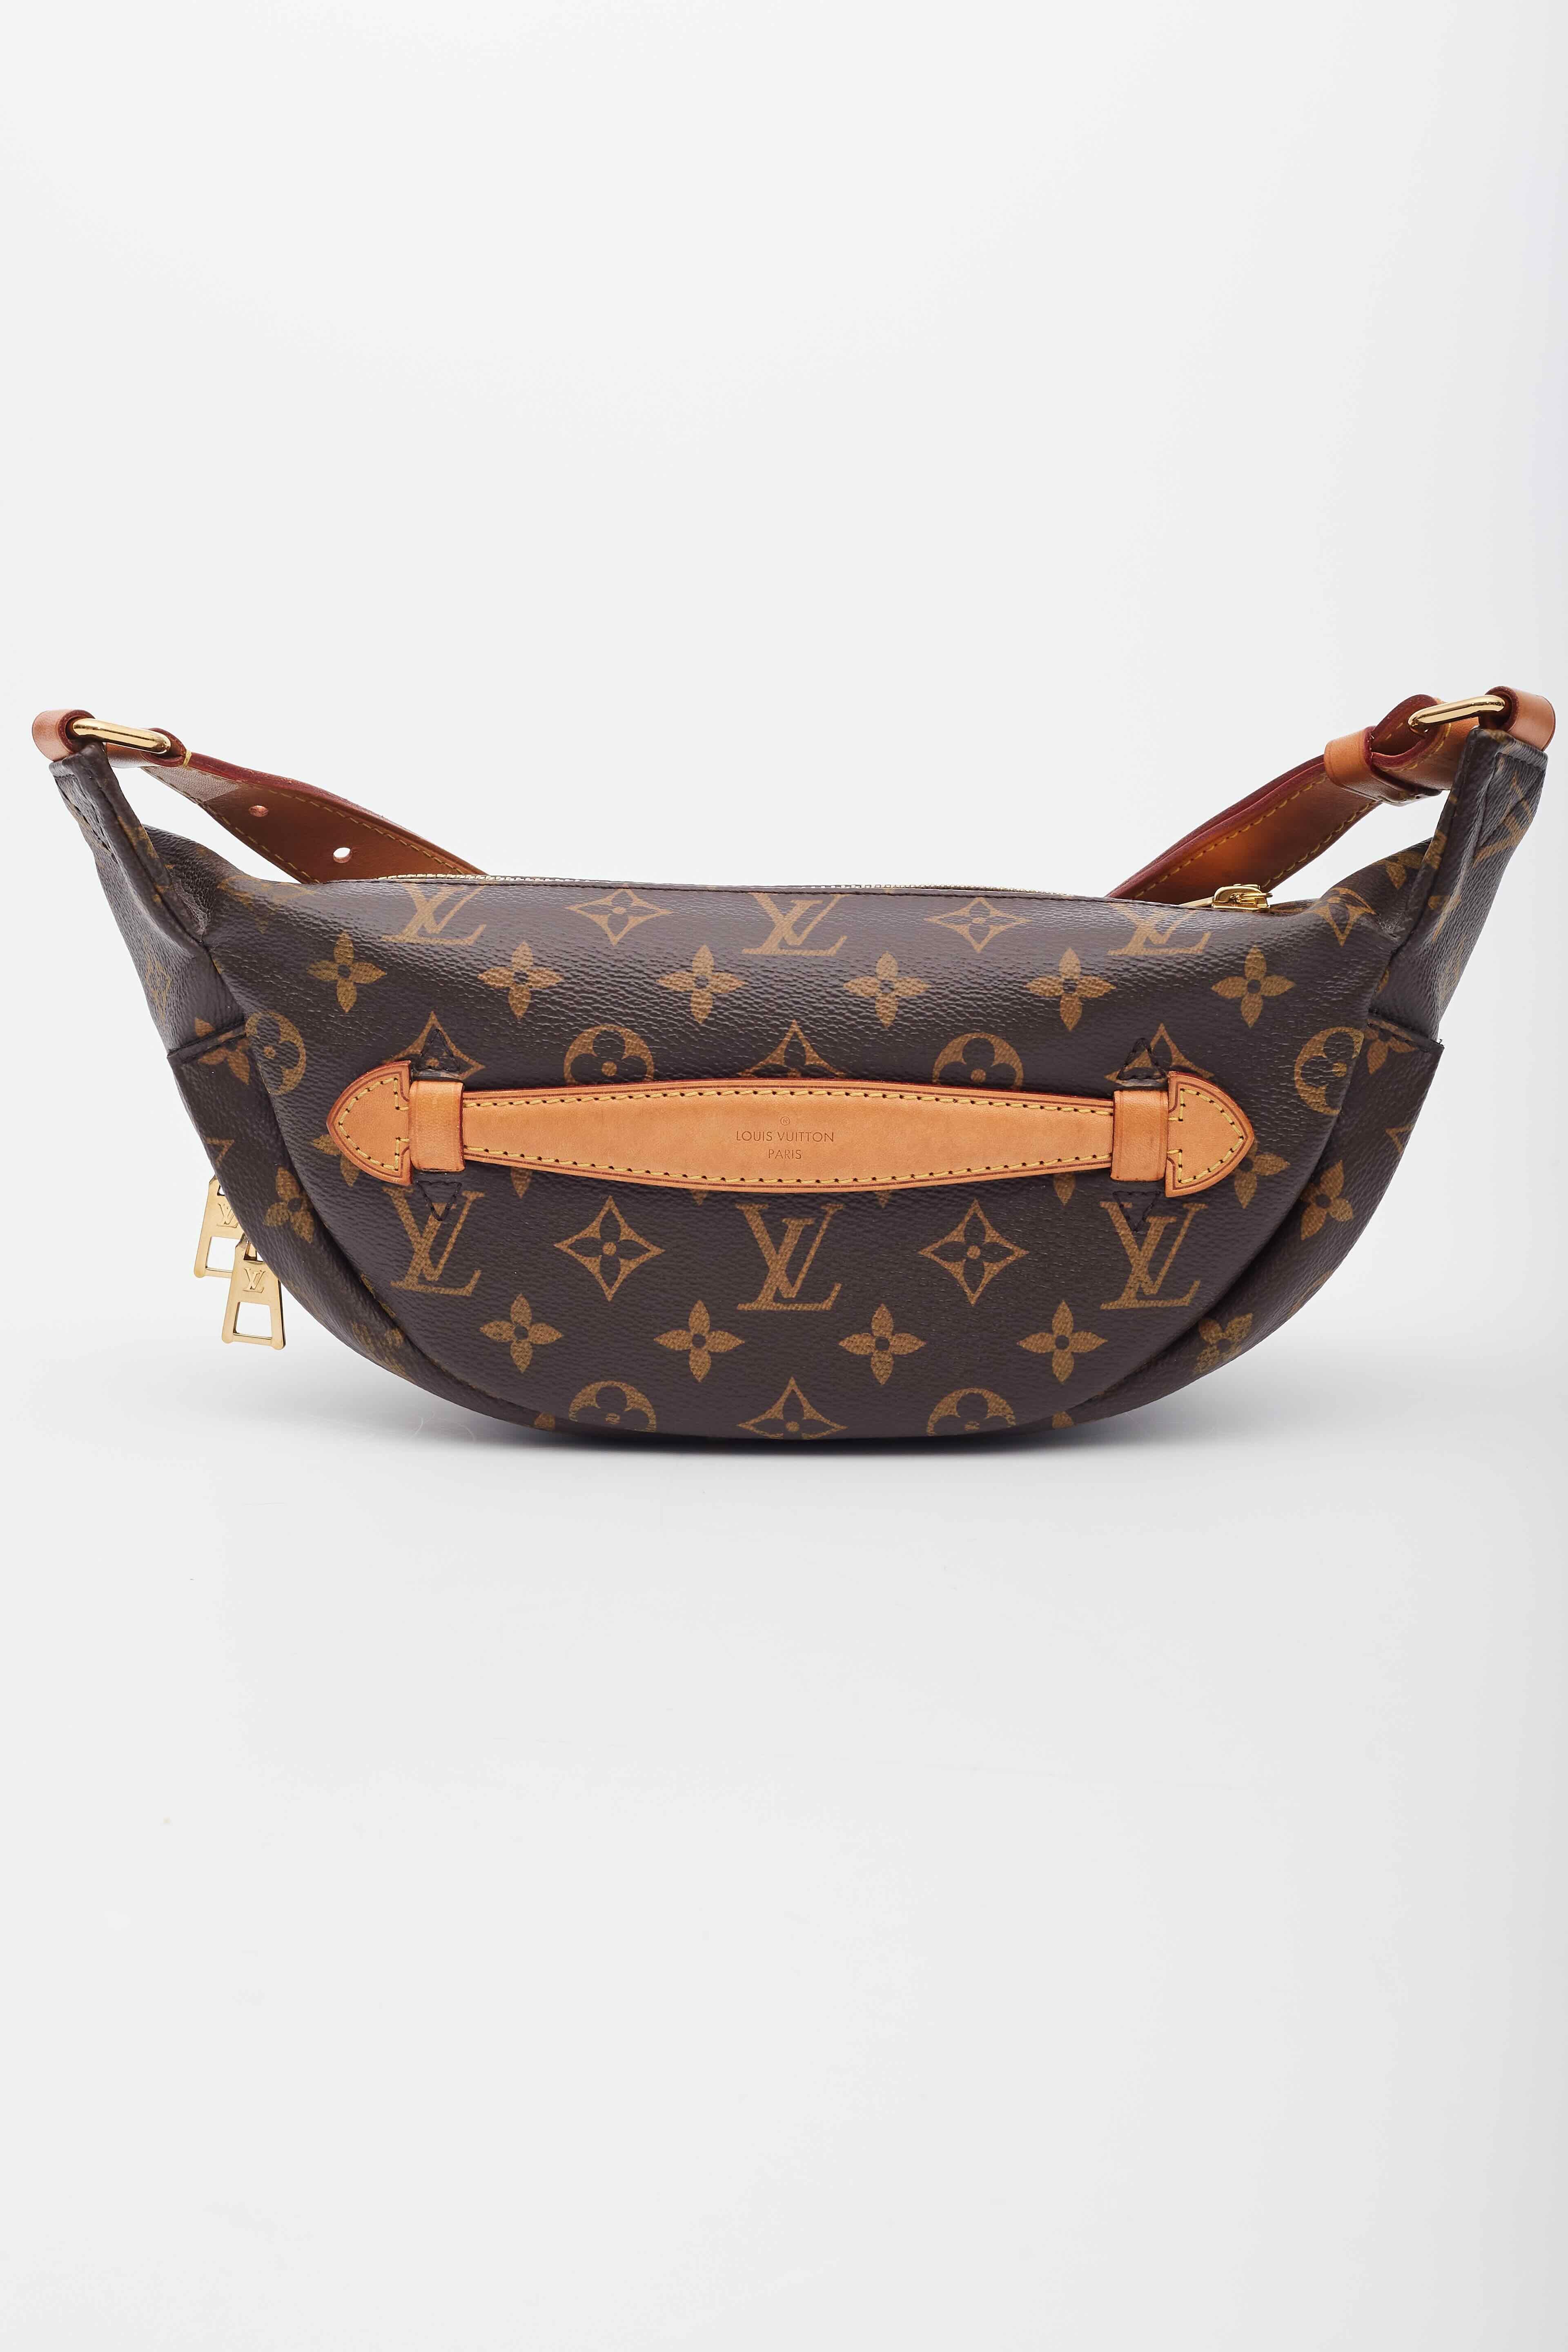 Louis Vuitton Monogram Canvas Bum Bag 2018 In Good Condition For Sale In Montreal, Quebec